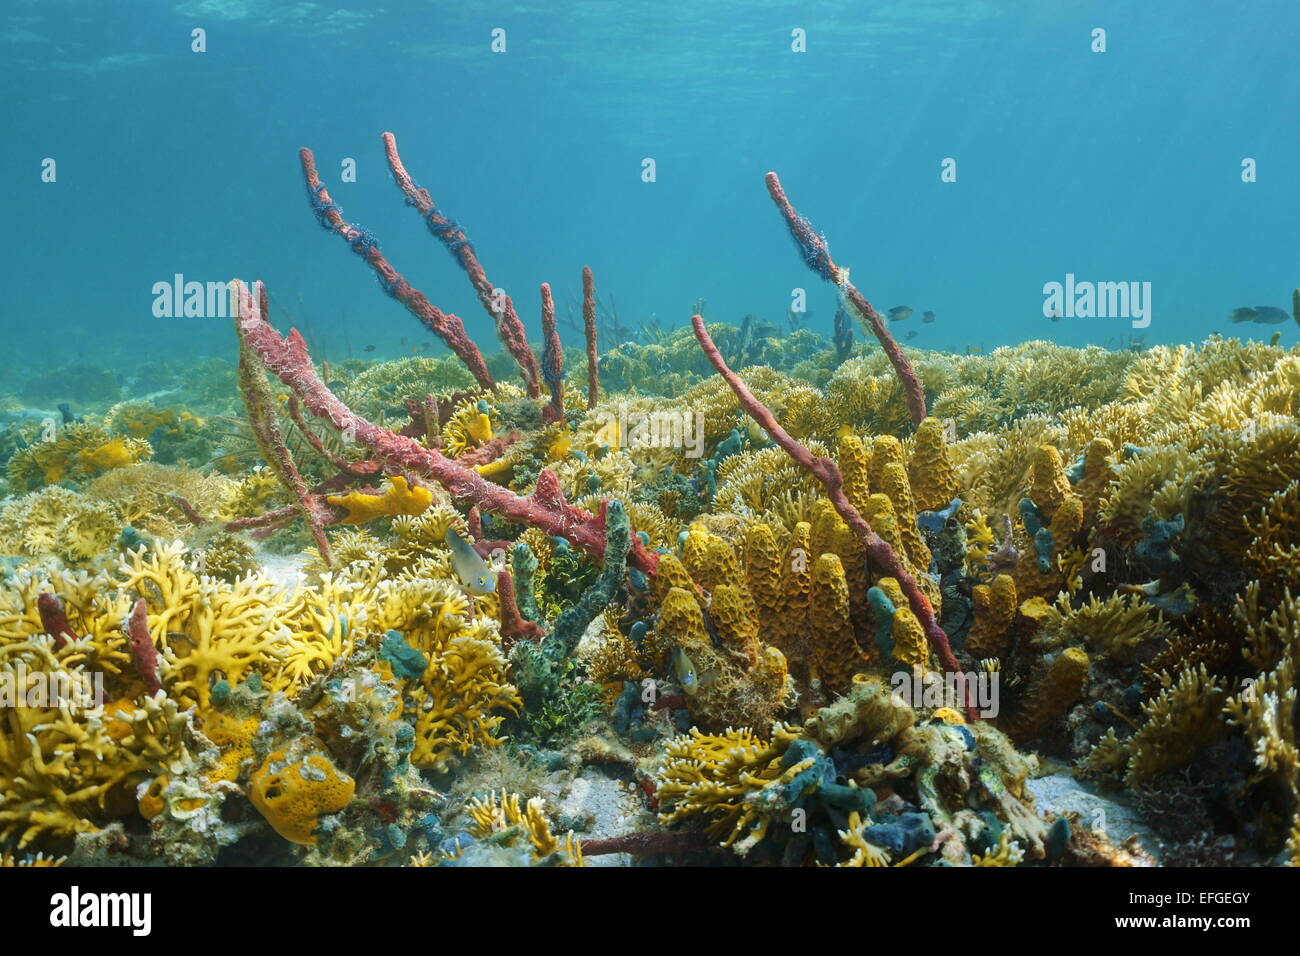 Caribbean coral reef underwater with colorful sea sponges and fire corals colonies, Bocas del Toro, Panama Stock Photo